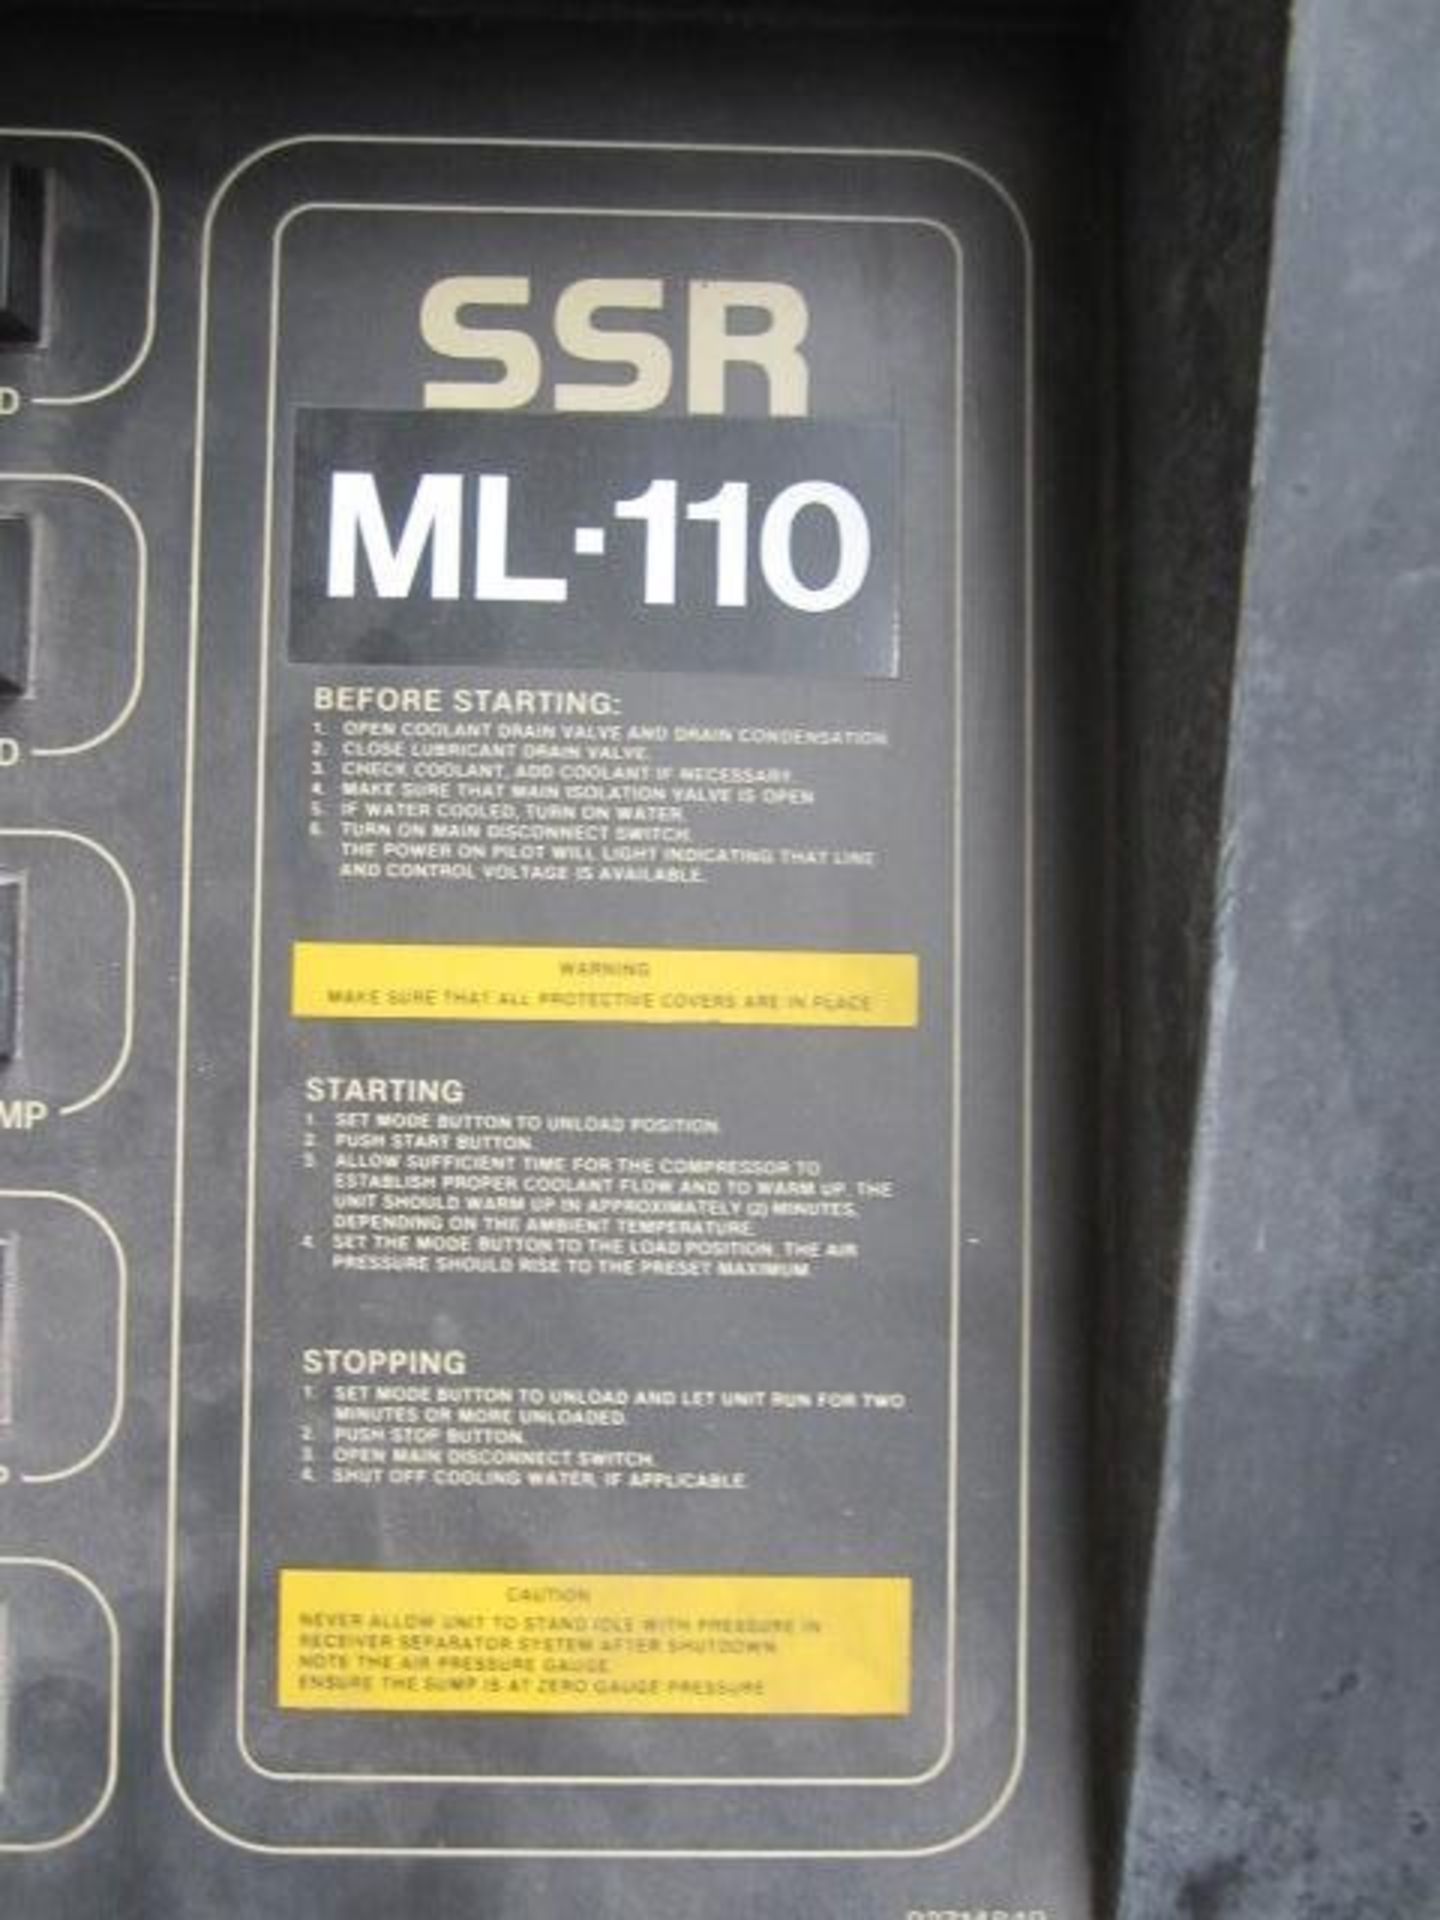 Ingersoll Rand SSR ML-110 packaged air compressor, serial no. 62554, recorded hours 44140 - Image 4 of 7